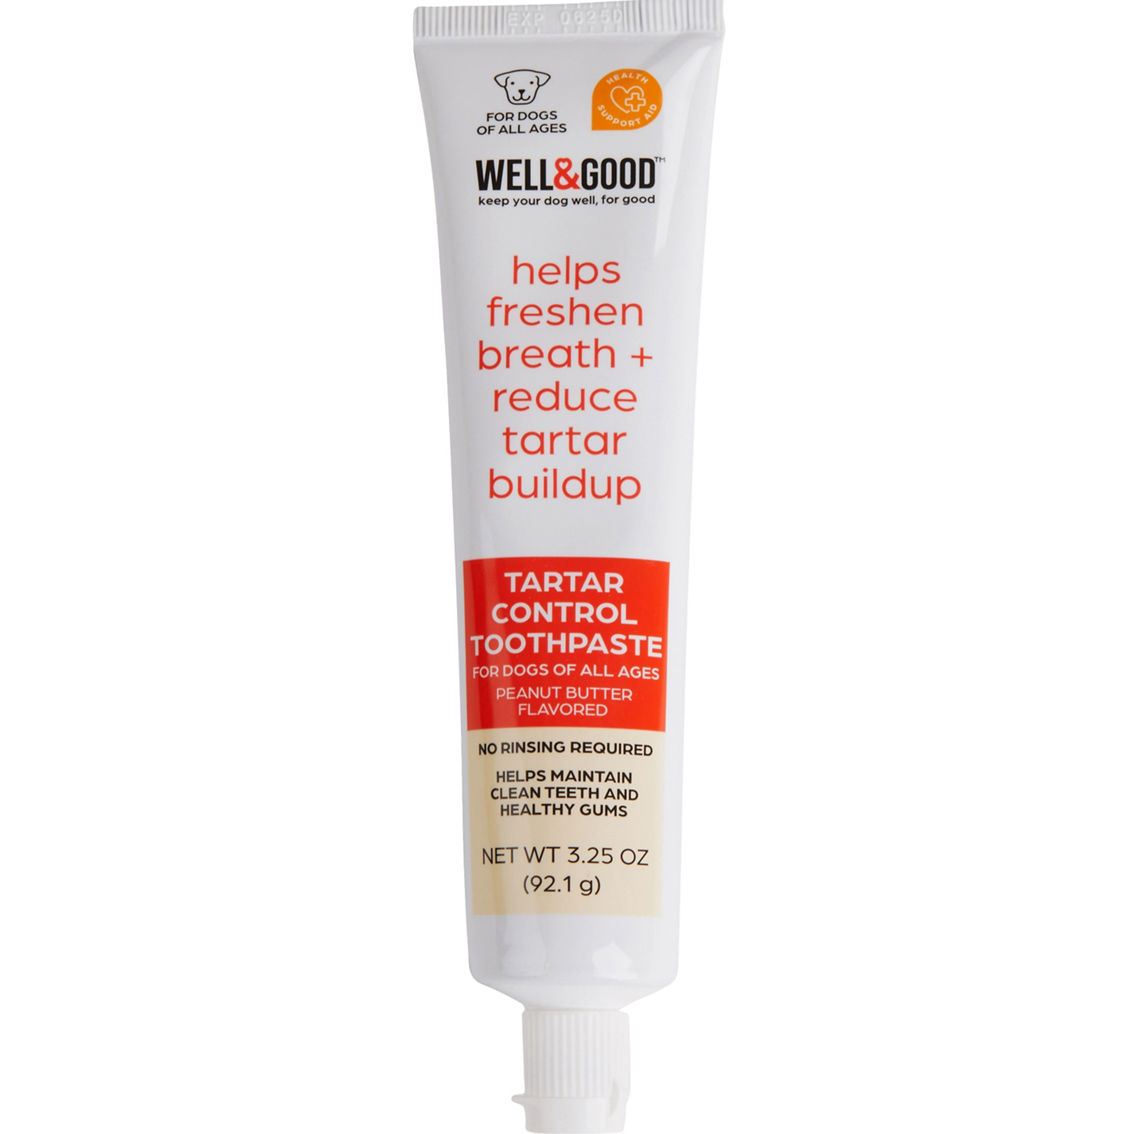 Well & Good Tartar Control Peanut Butter Toothpaste for Dogs 3.25 oz. - Image 3 of 3